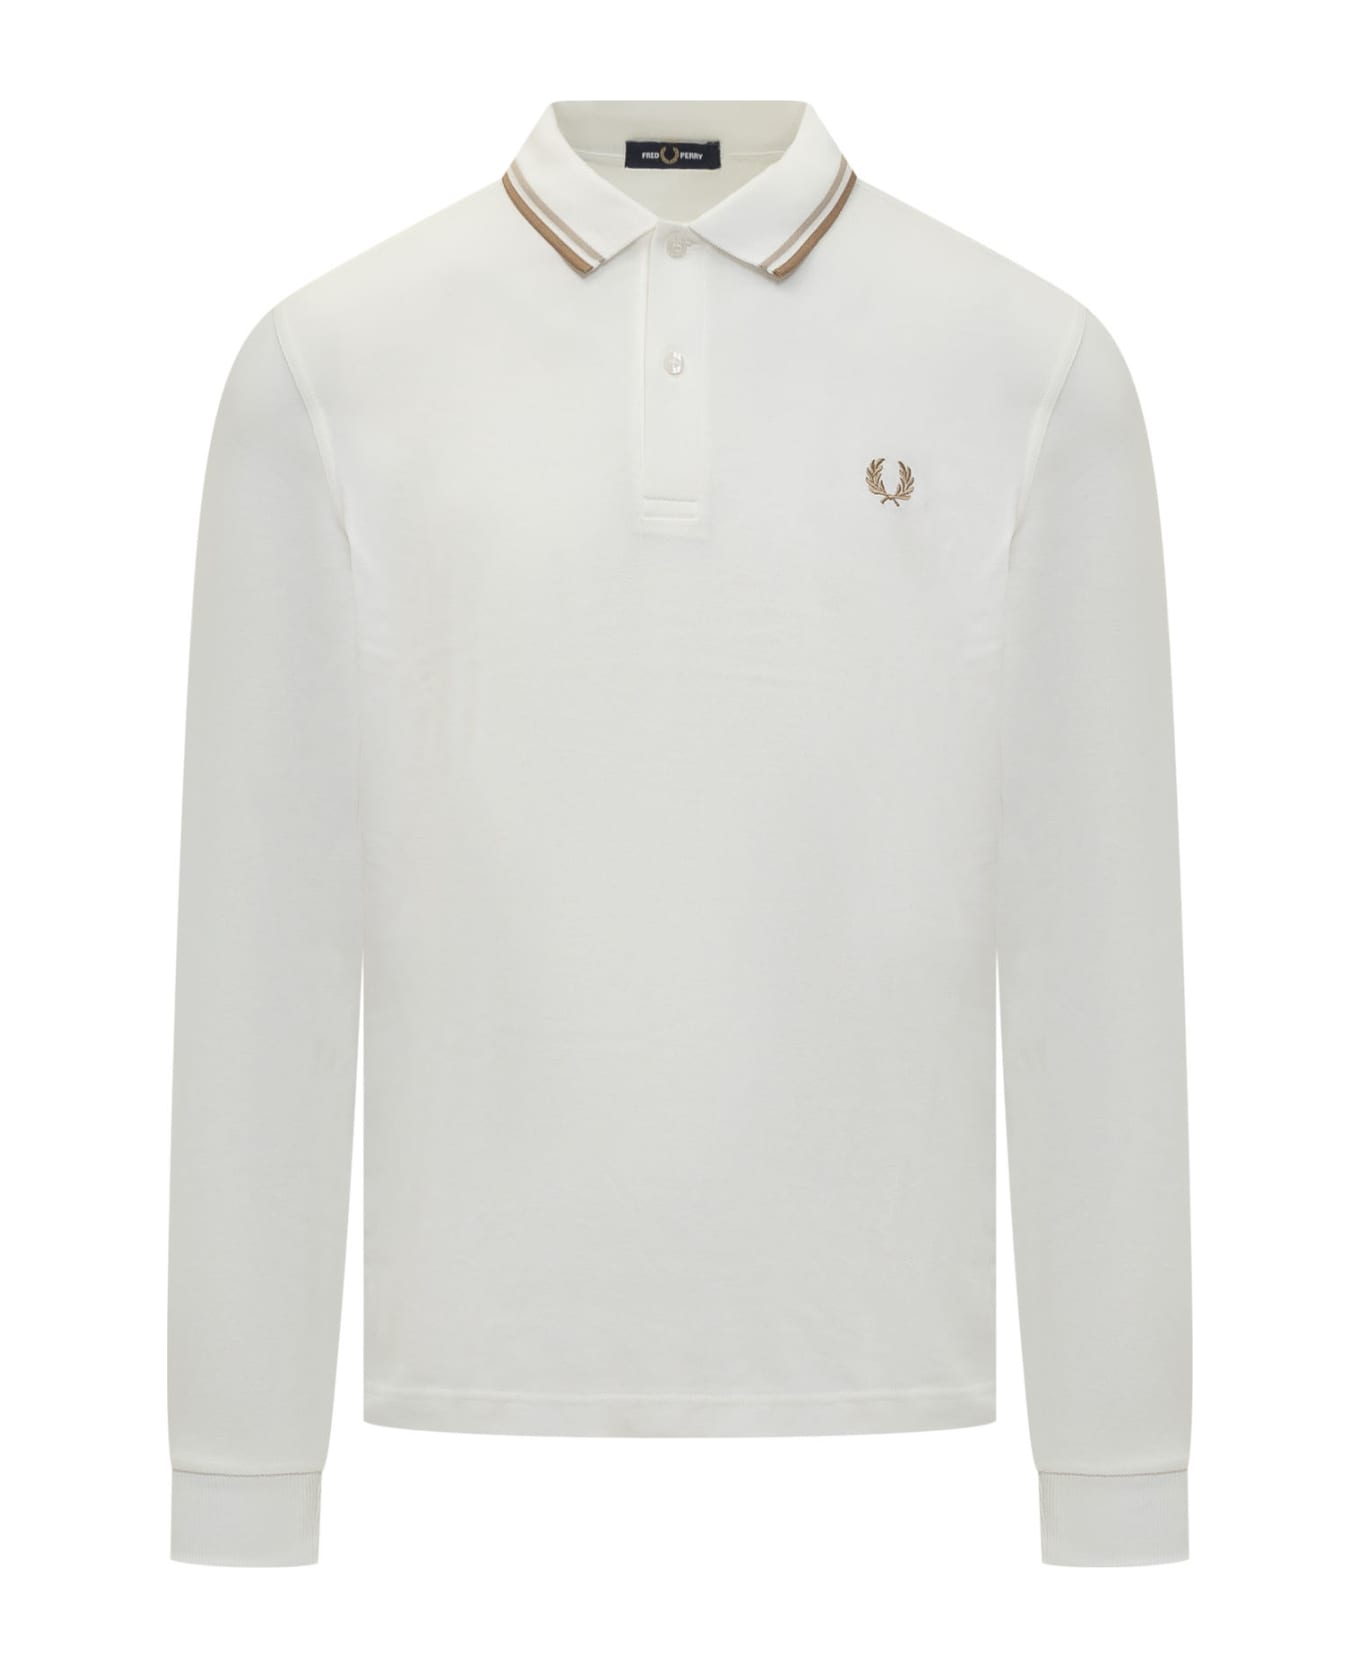 Fred Perry Polo Shirt - SNOWH/OAT/WSTONE シャツ